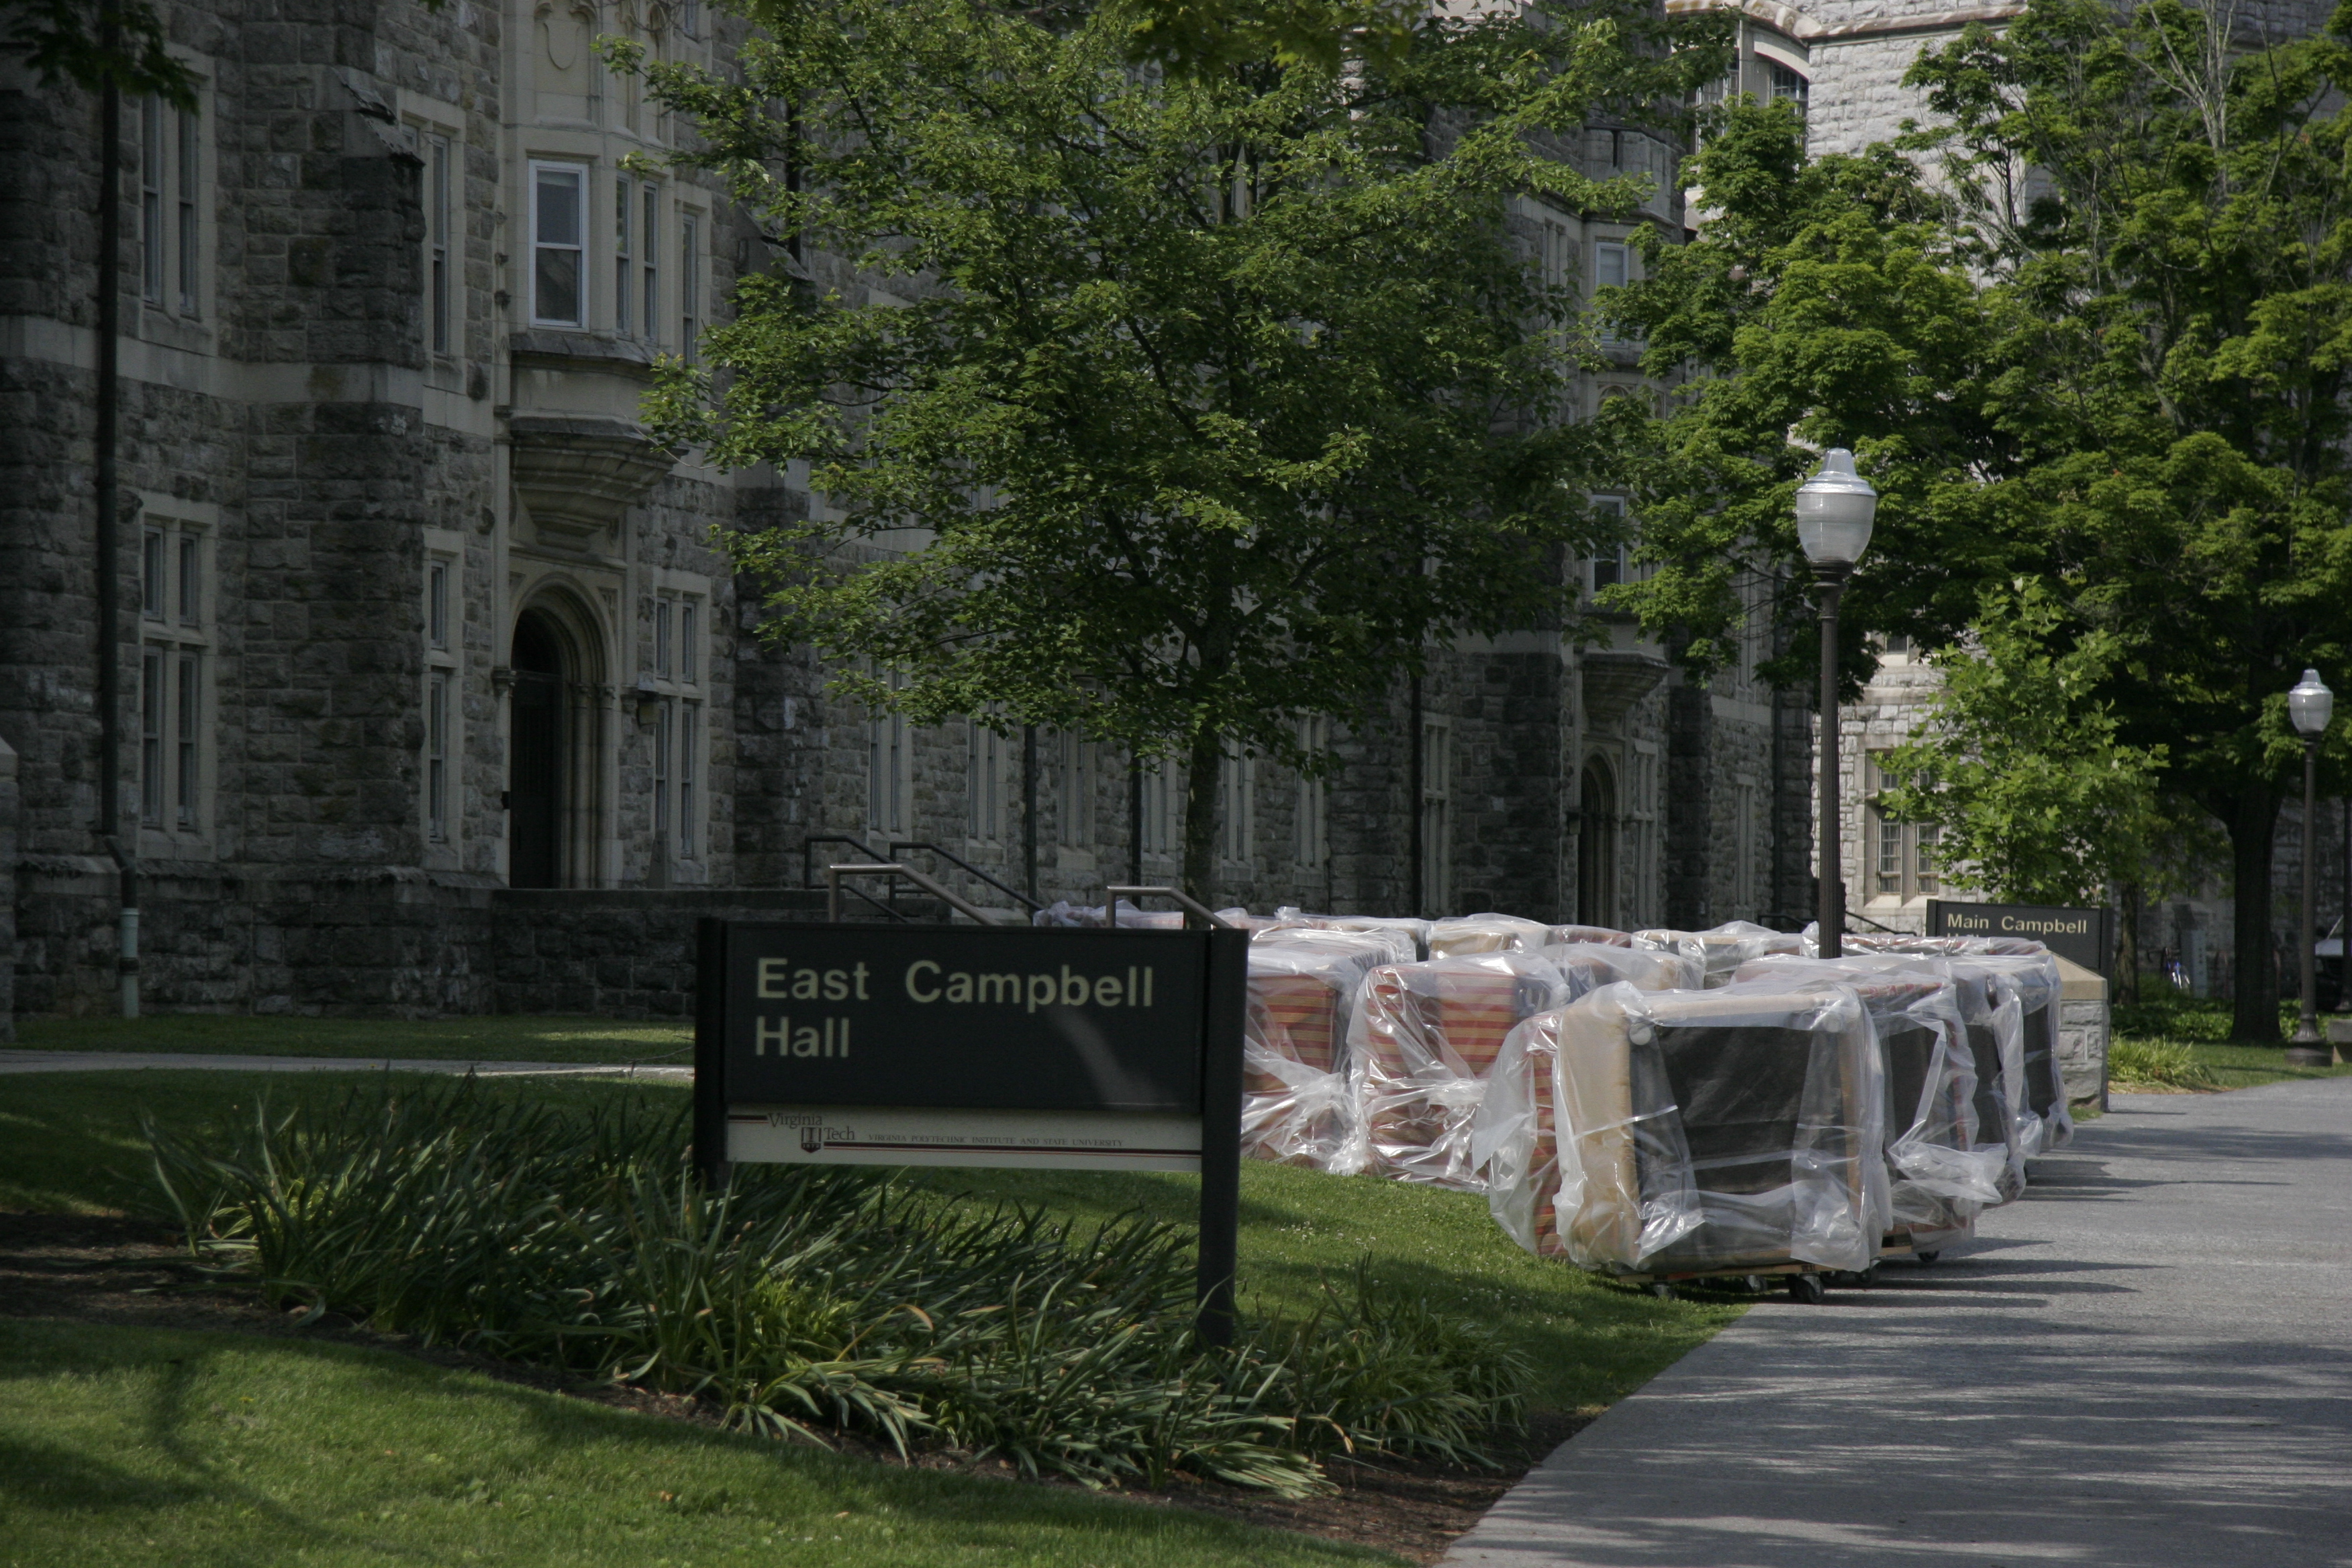 New modular lounge furniture awaits installation in East Campbell Hall.